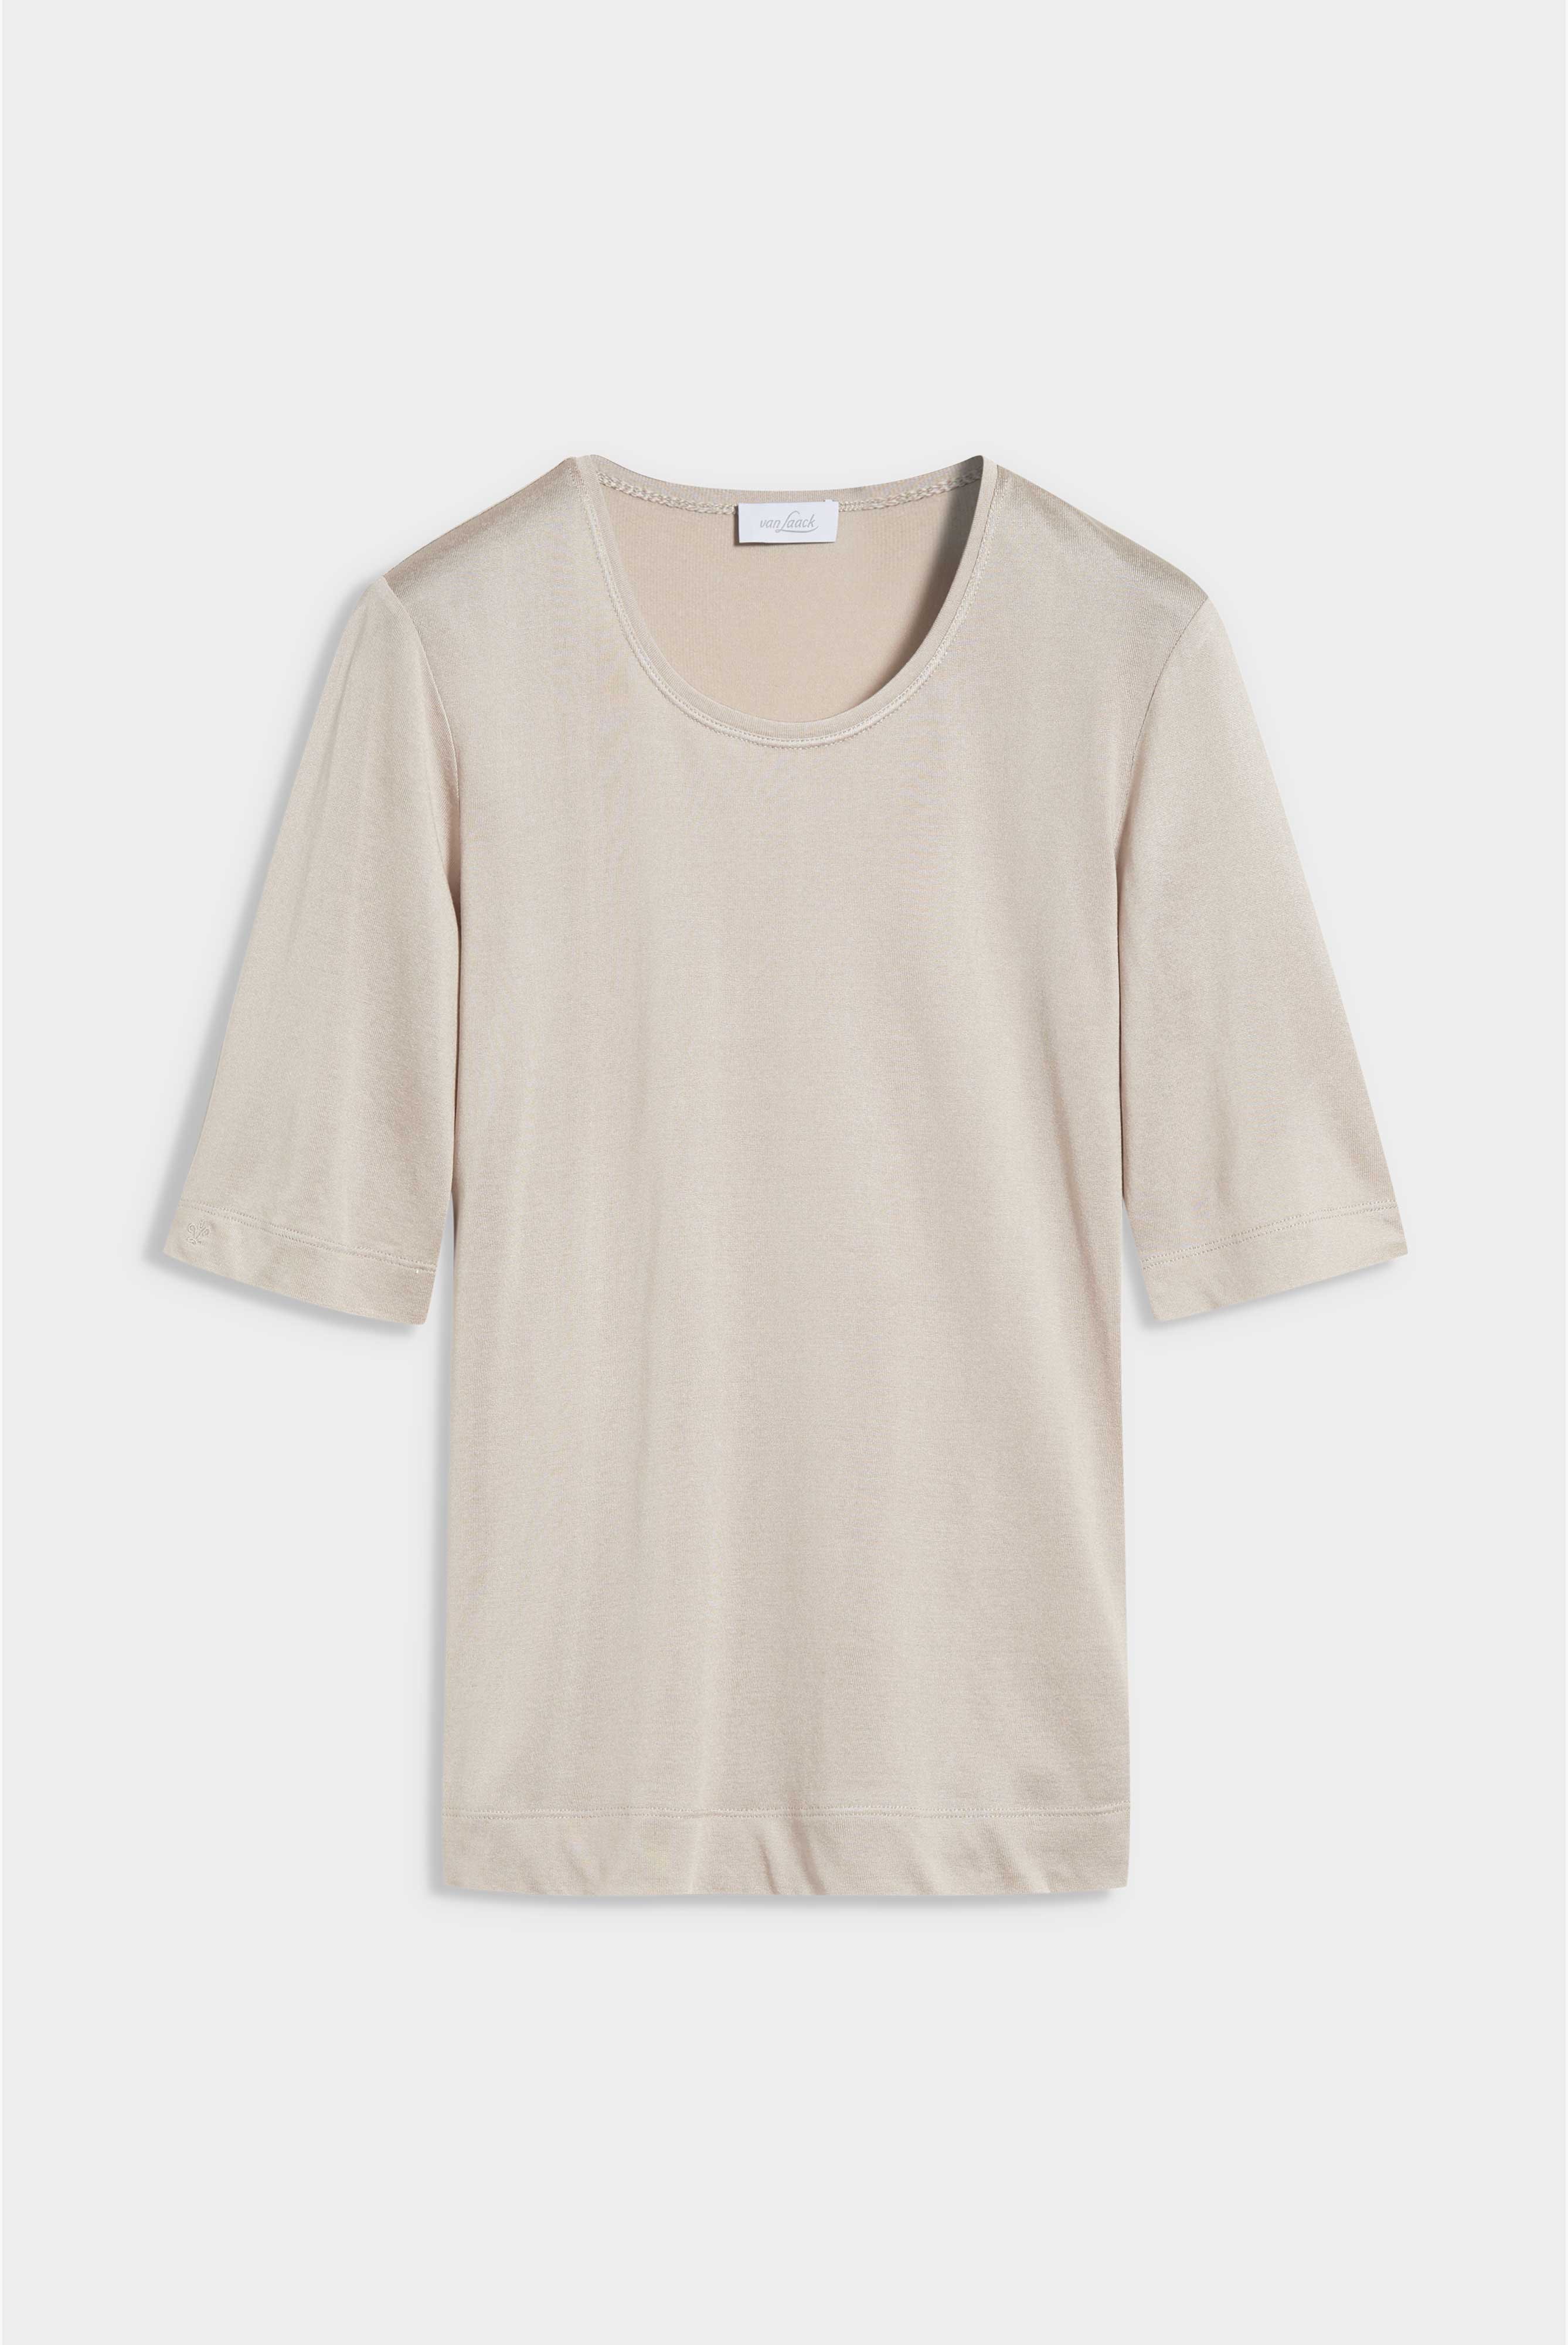 Tops & T-Shirts+Roundneck T-shirt with Silk+07.2122..Z20090.120.44